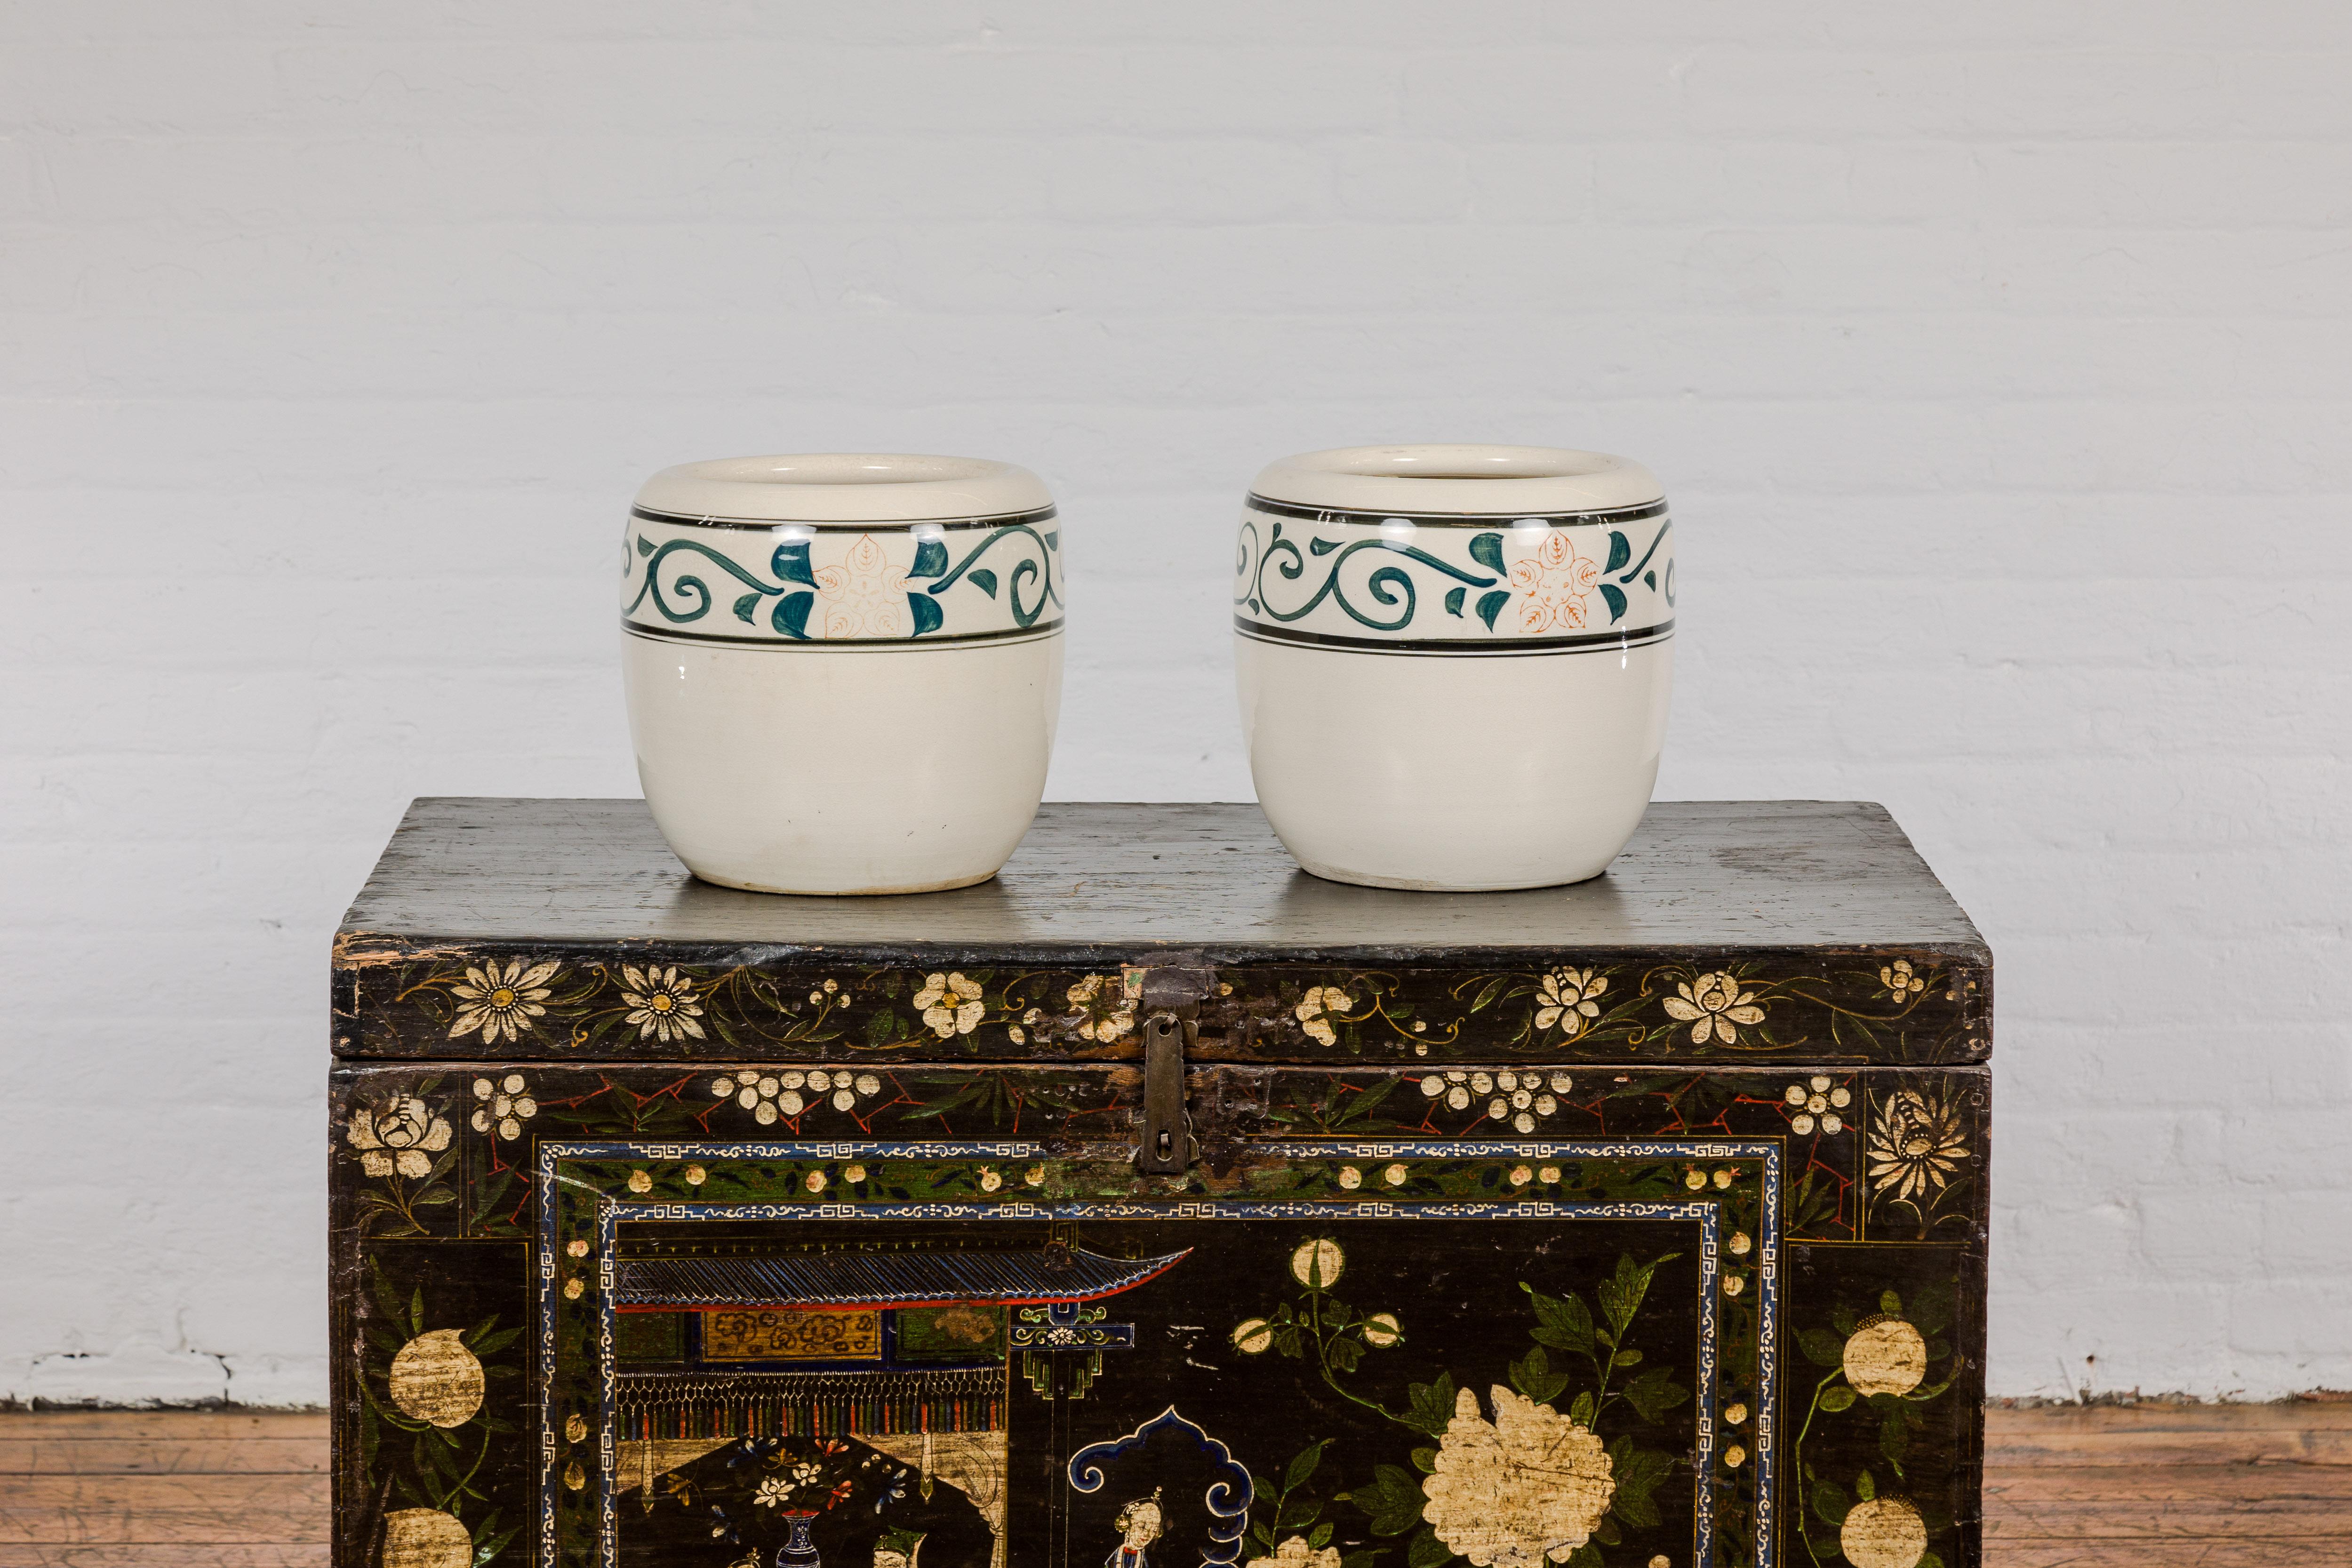 Pair of Late Qing Dynasty Ceramic Planters with Green Floral Décor For Sale 9